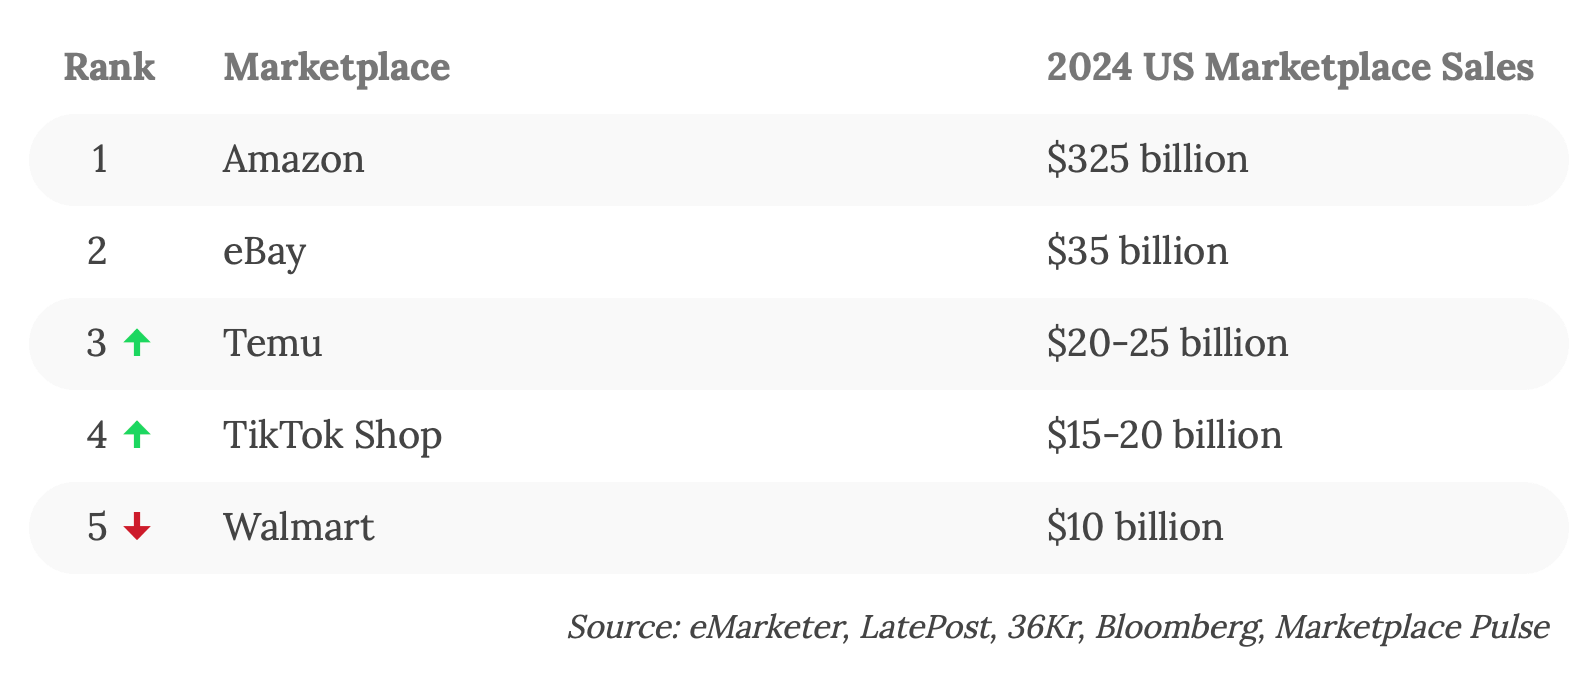 Top 5 US e-commerce marketplaces in 2024